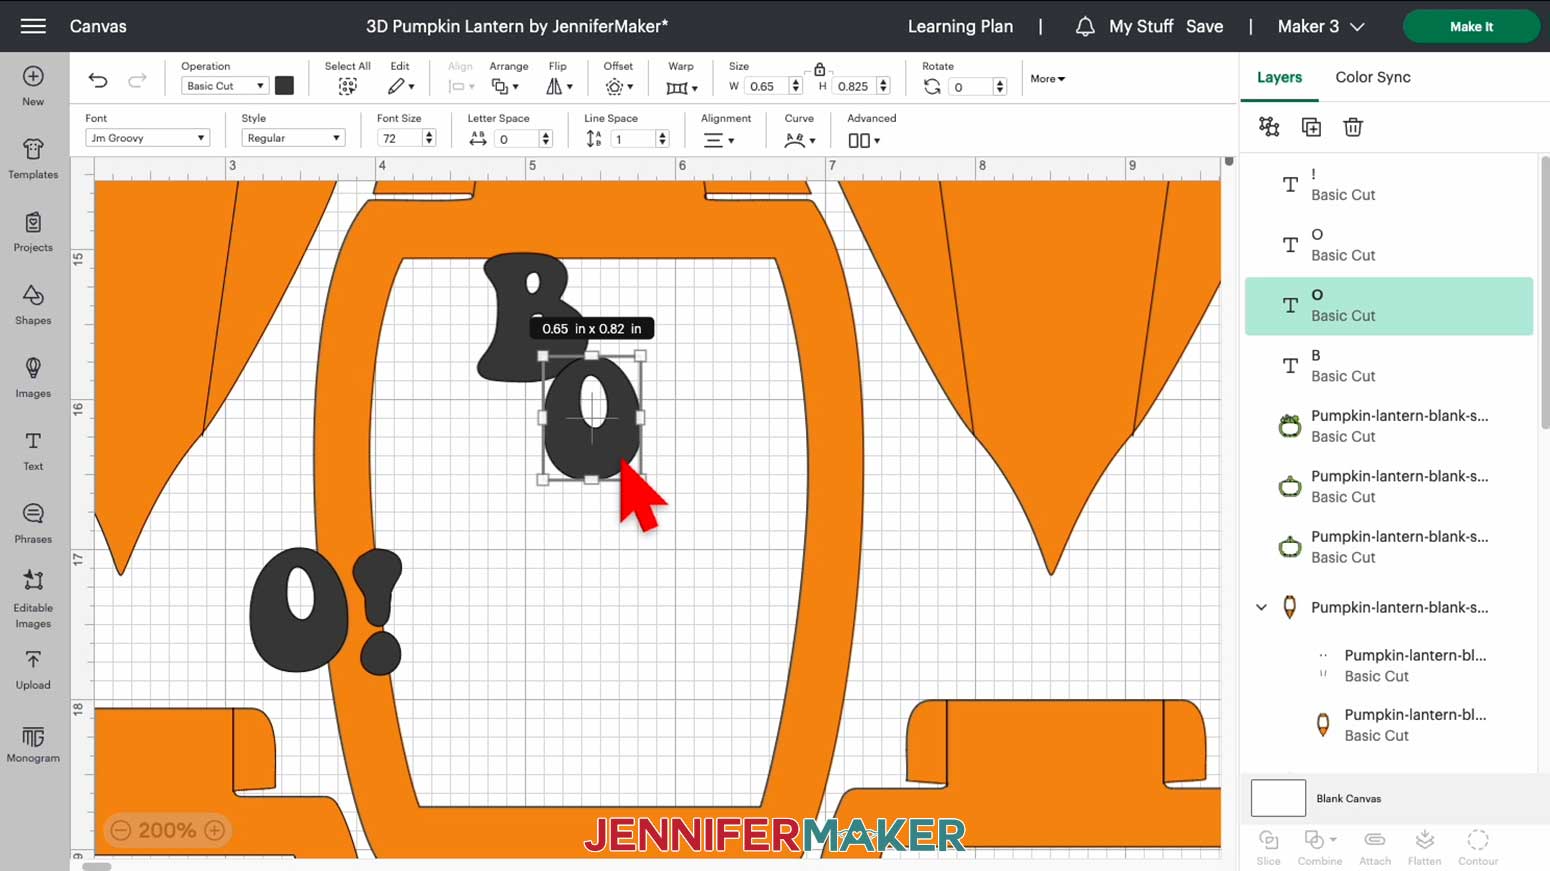 In Design Space, move the "O" into position so it overlaps the "B" in the bottom right corner for the customized 3D pumpkin lantern panel